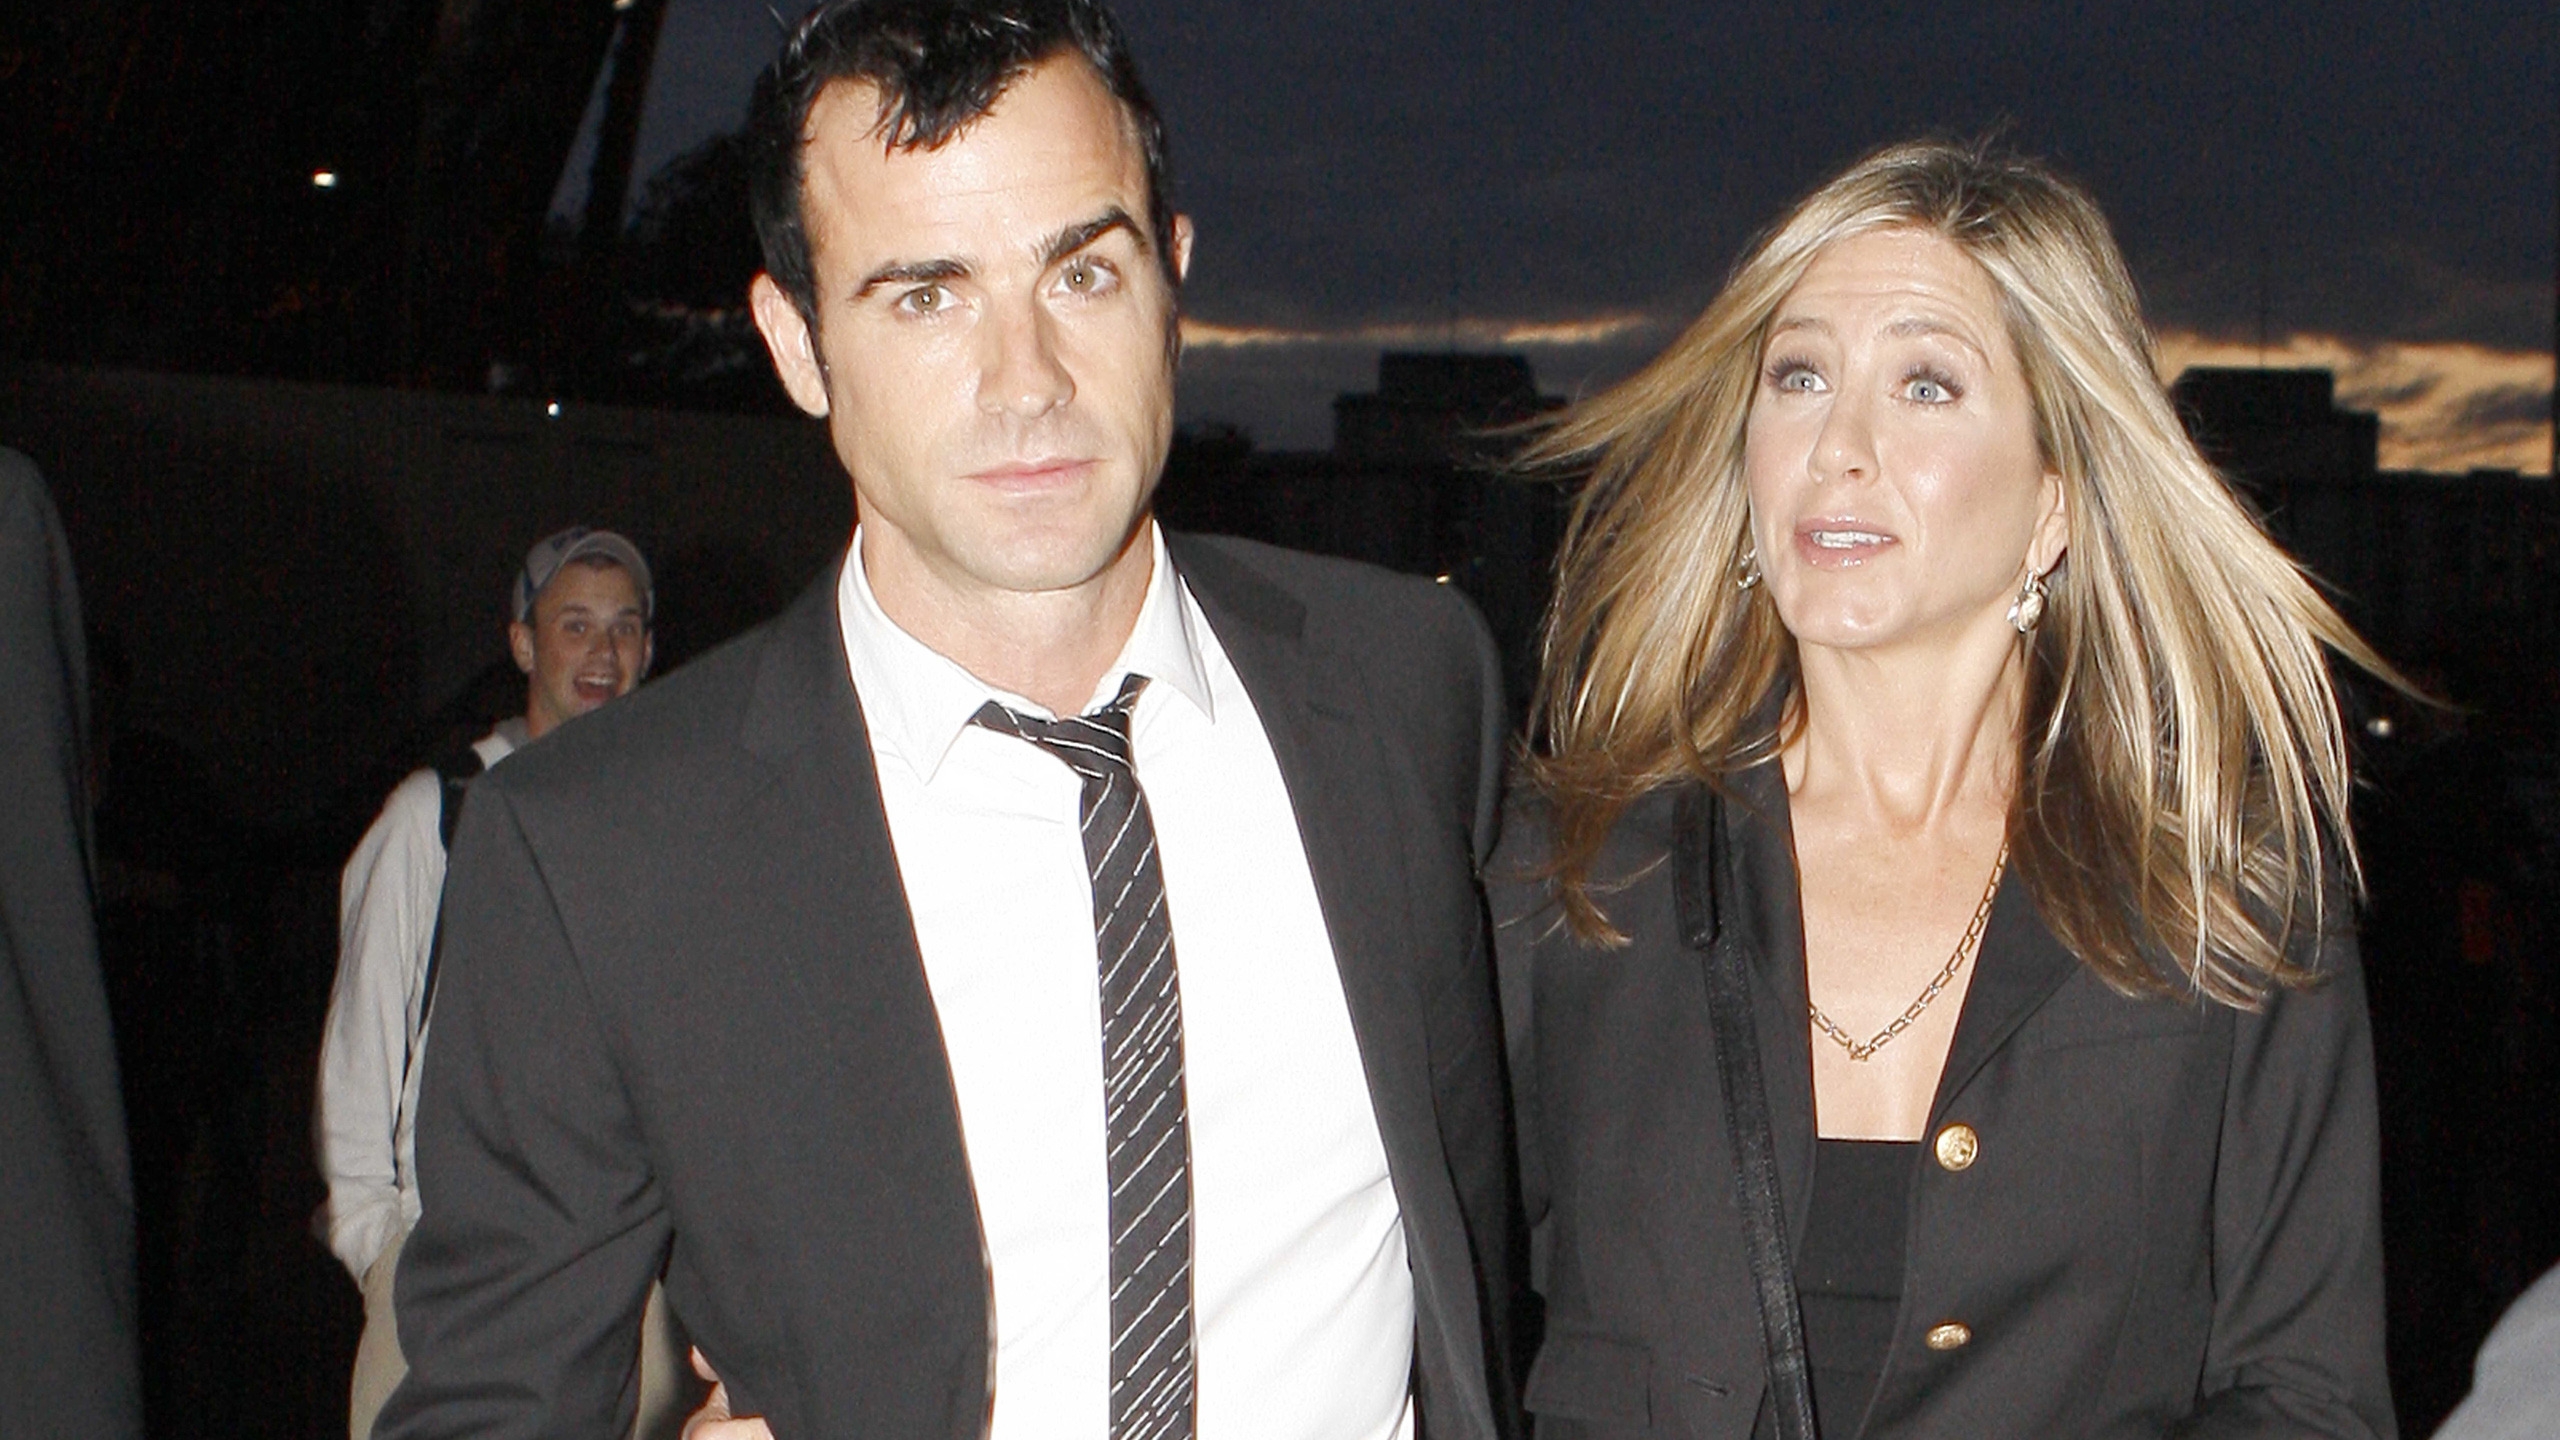 Jennifer Aniston and Justin Theroux for 2560x1440 HDTV resolution